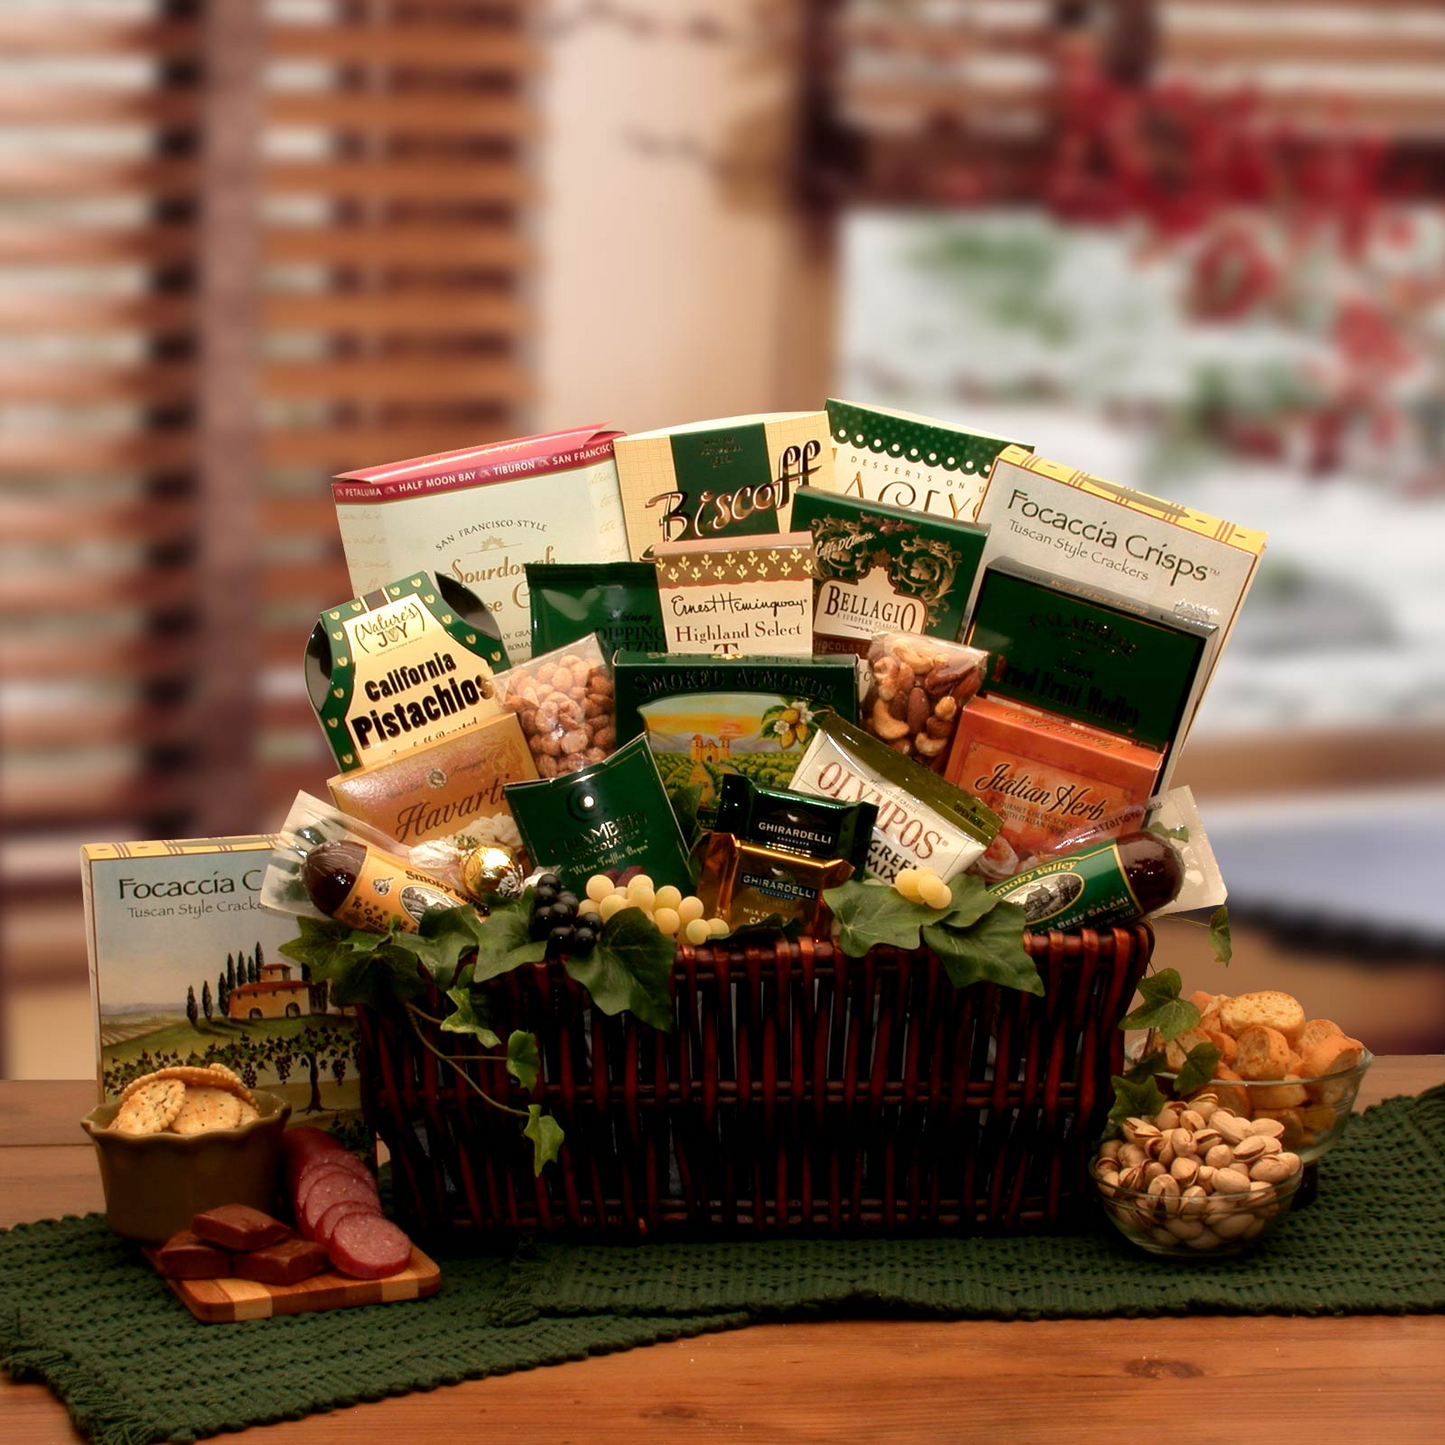 Indulgent Gourmet Gift Basket - Deluxe Assorted Nuts, Chocolates, and More